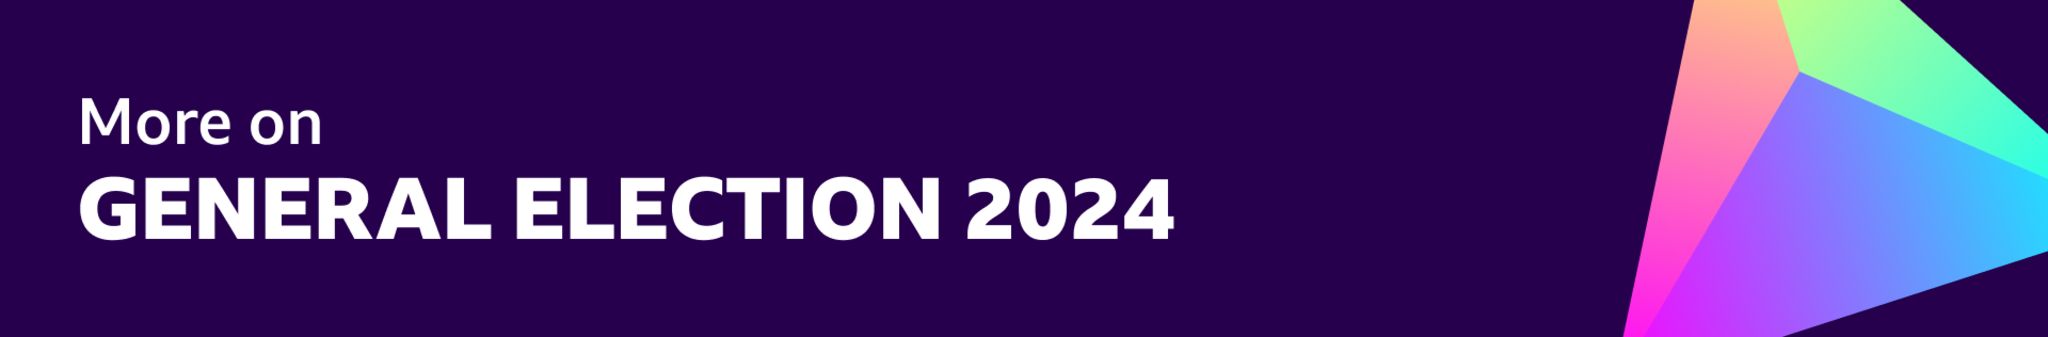 BBC banner saying More on General Election 2024